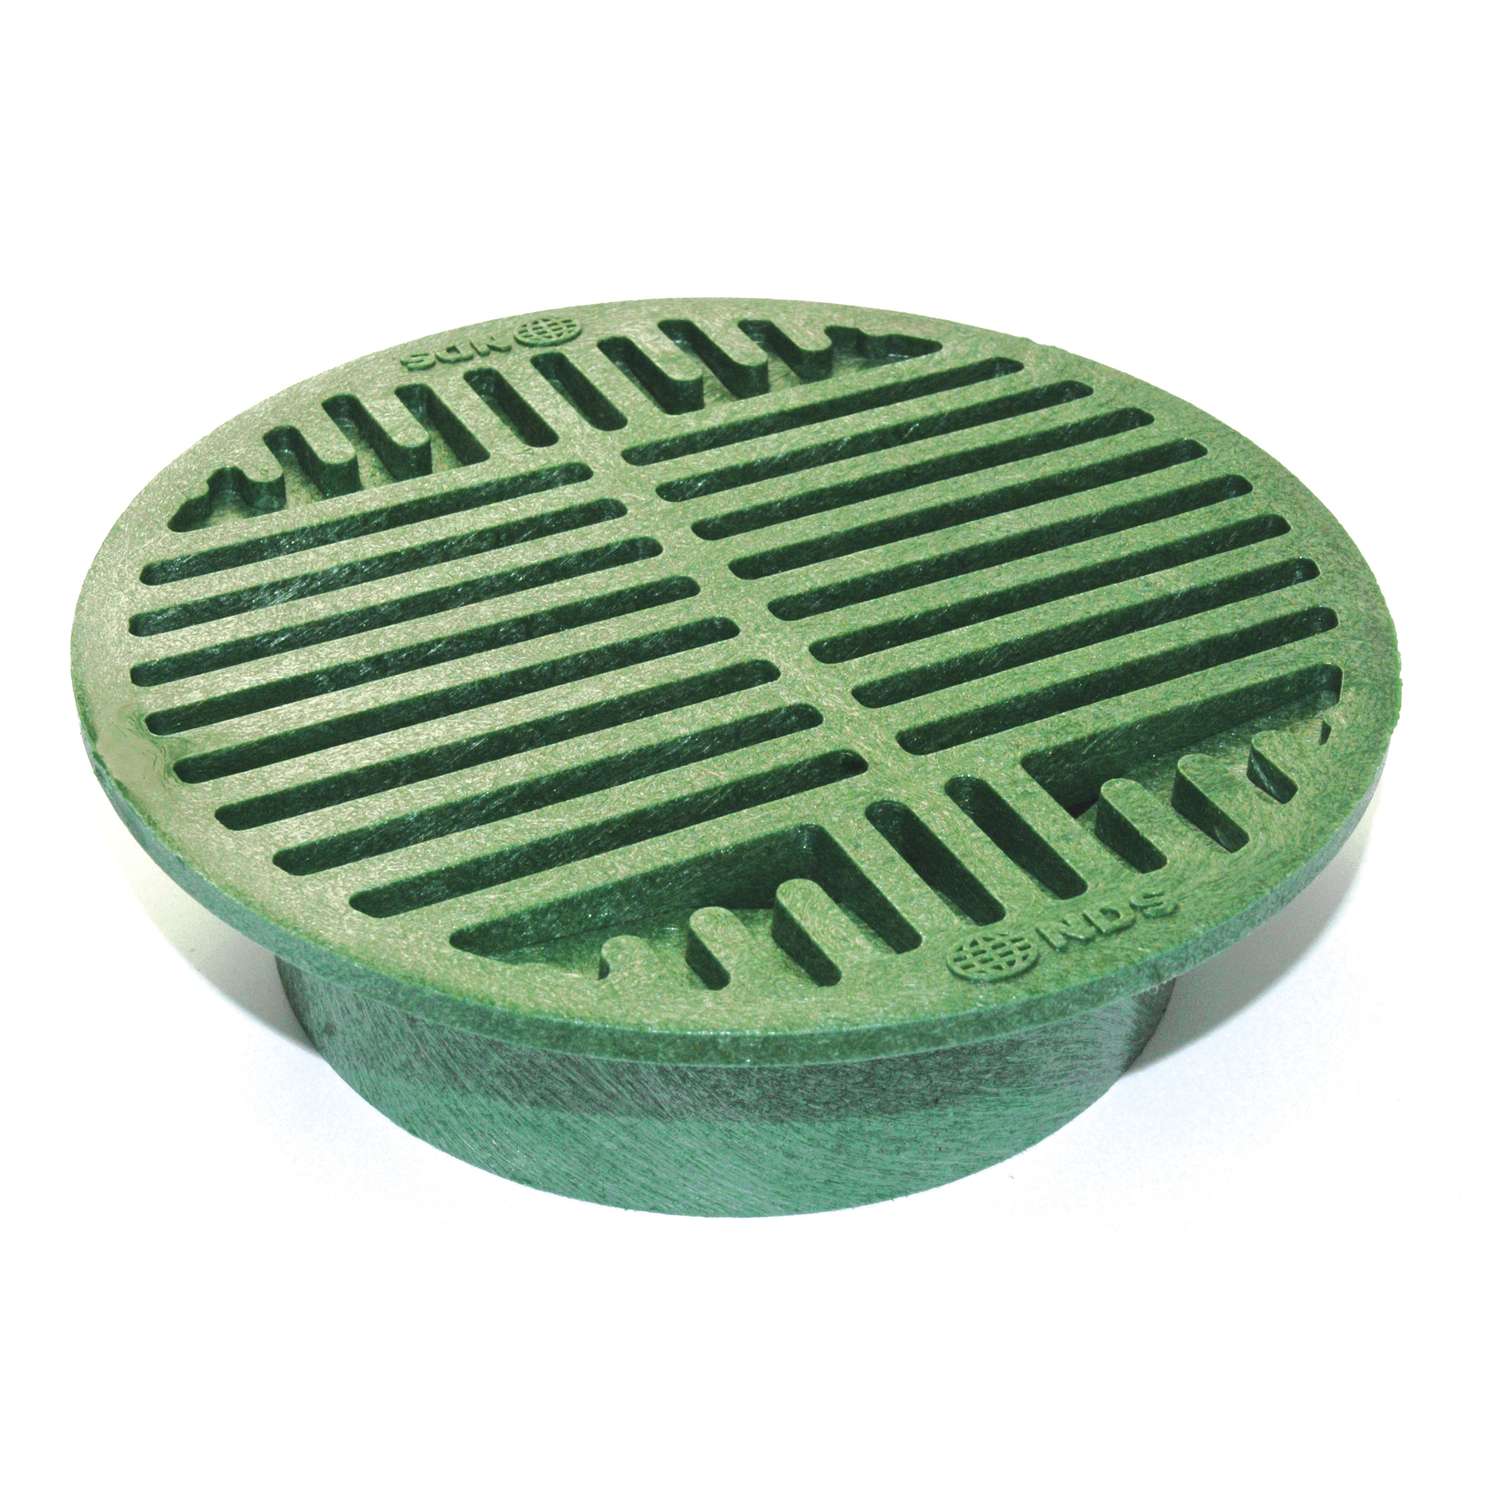 Handle Light Foot Traffic NDS 6" Round Grate Green 